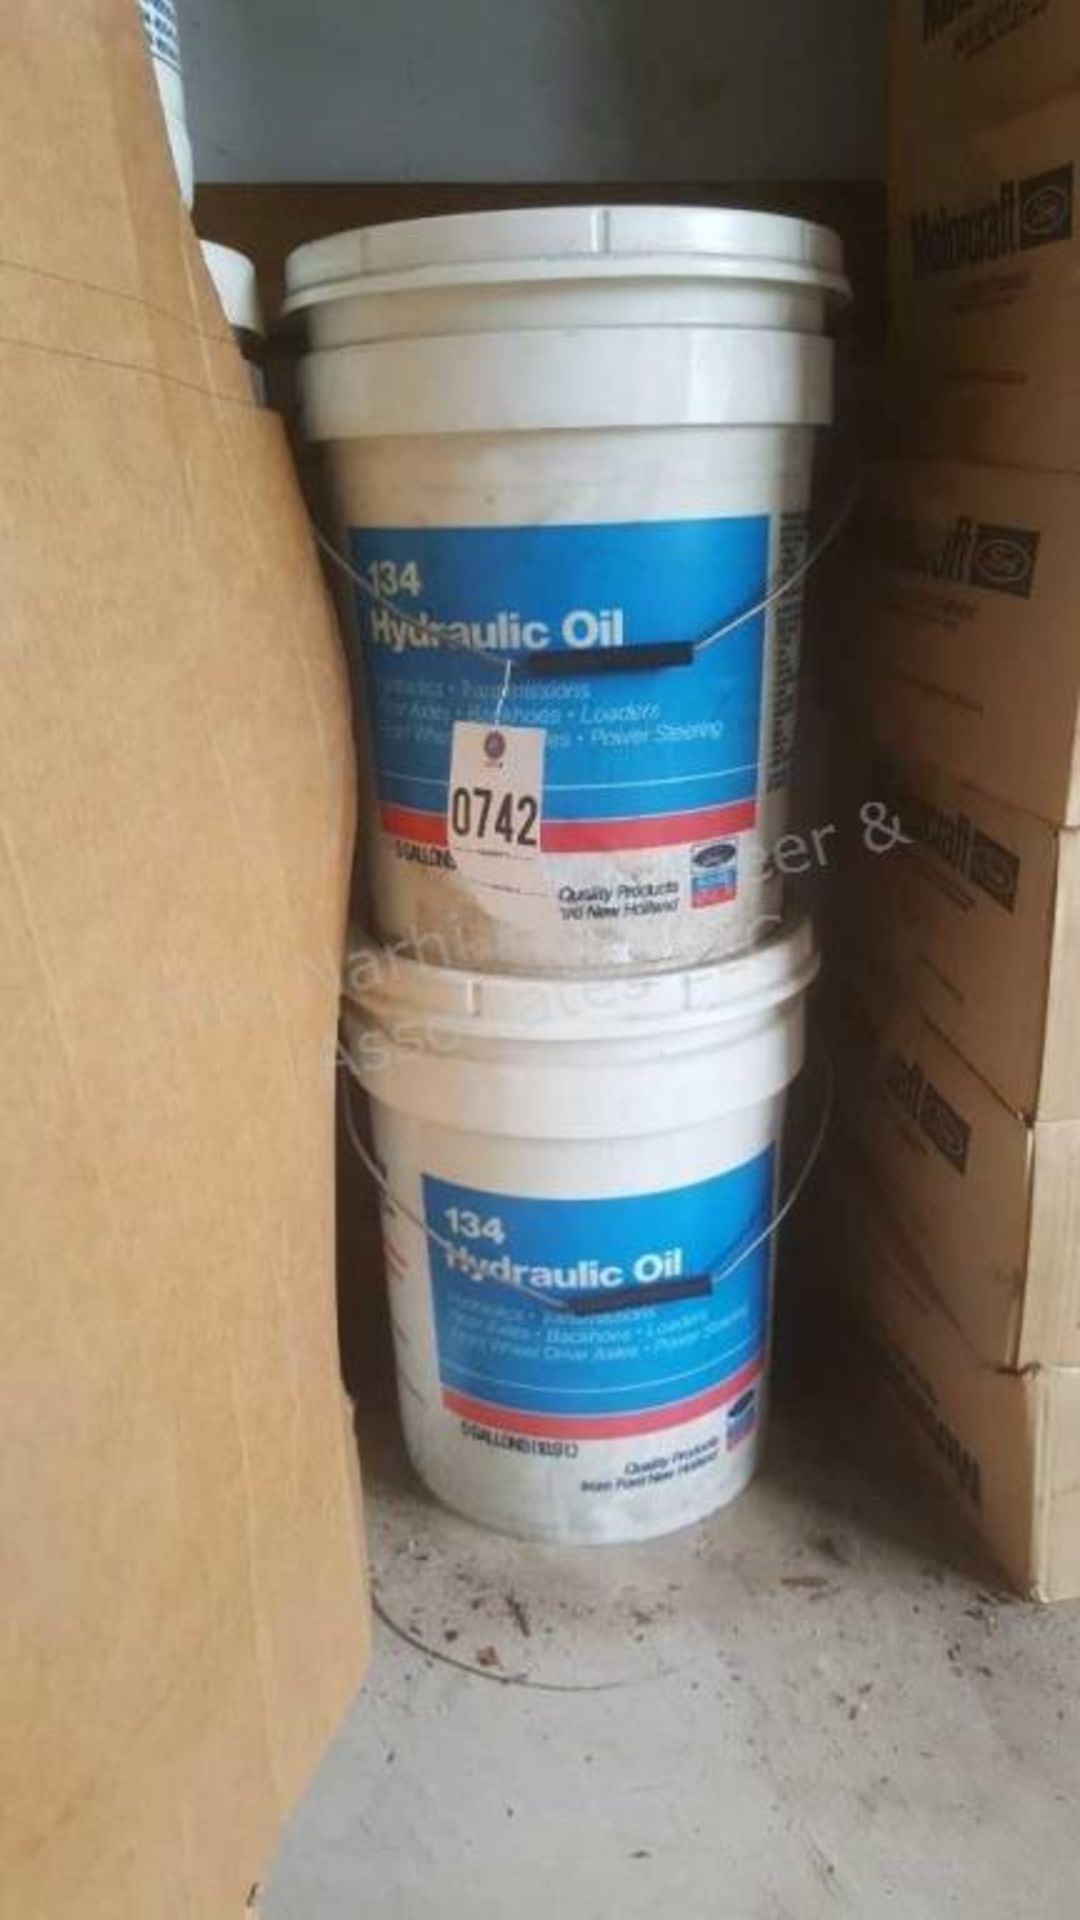 Two 5 gallon pails of 134 hydraulic oil